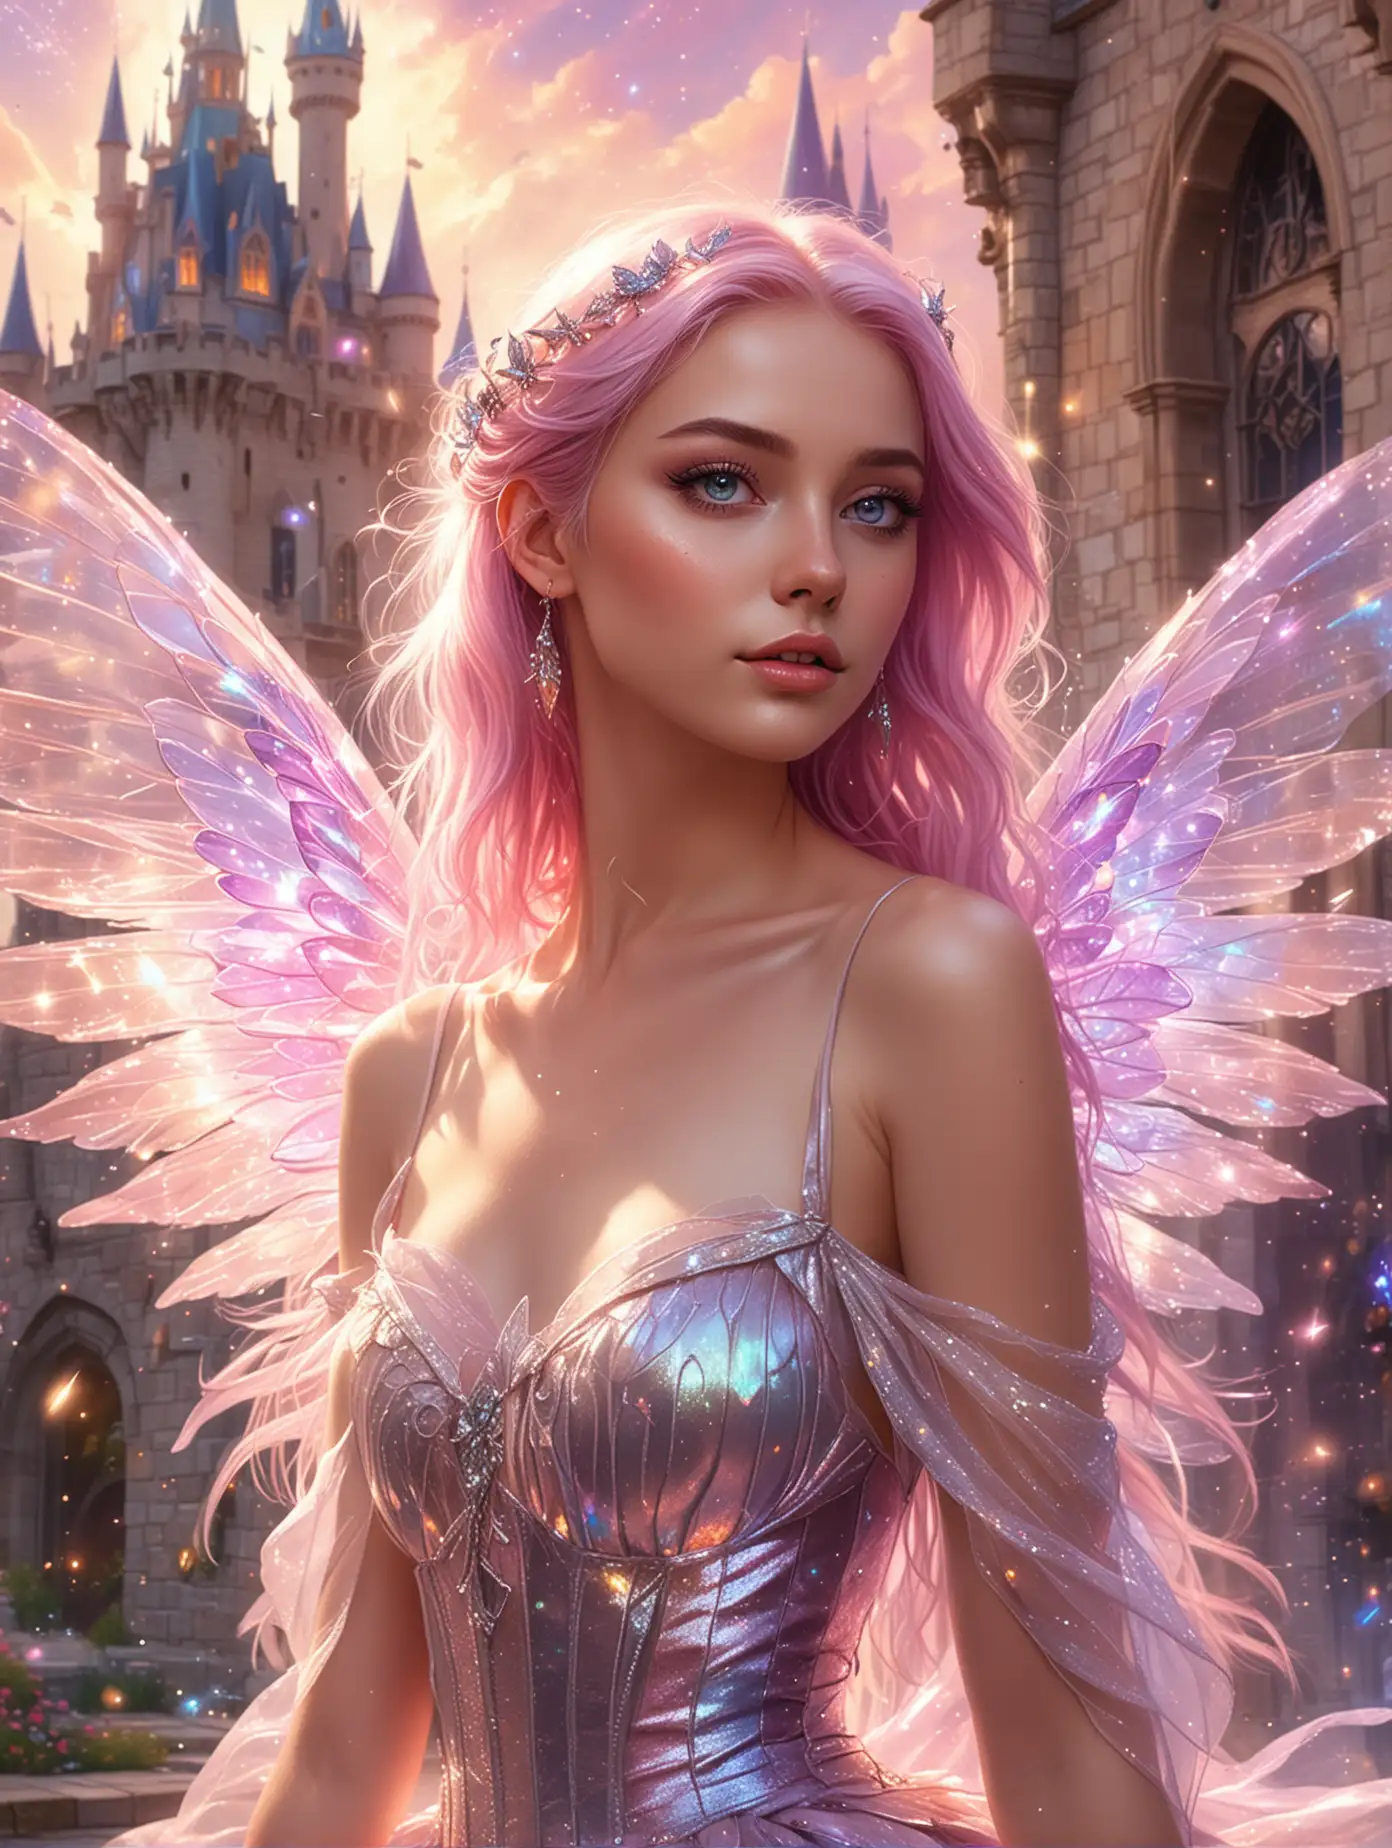 Enchanting Fairy Portrait with Iridescent Wings and Magical Castle Background